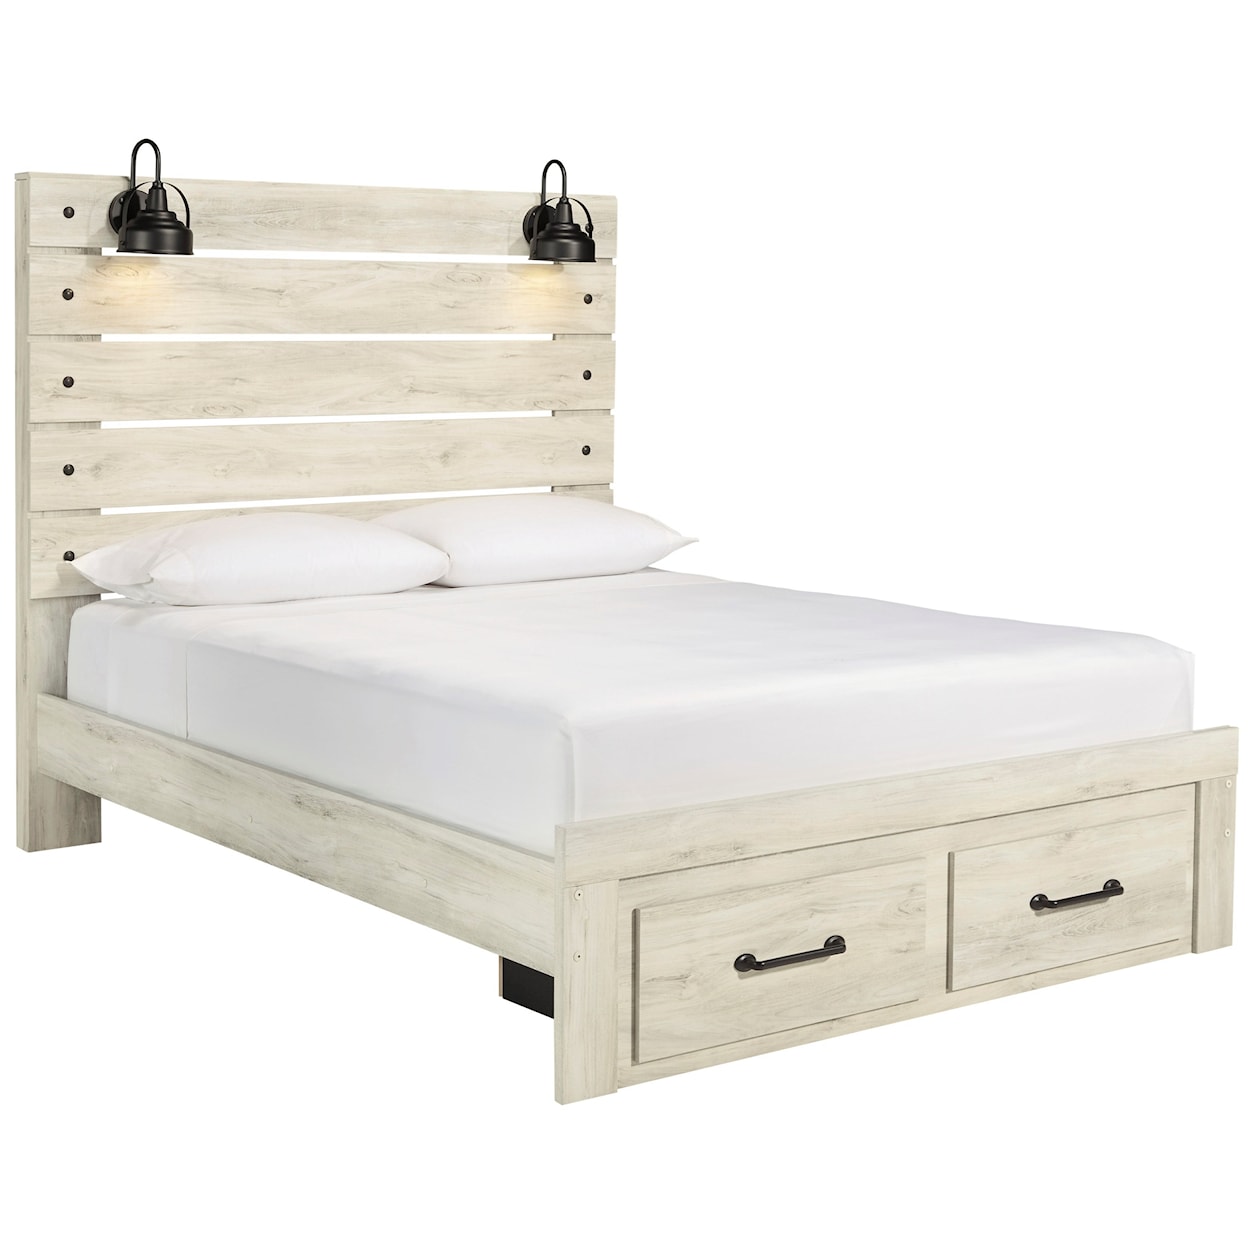 Signature Design by Ashley Baleigh Queen Panel Bed with Footboard Storage